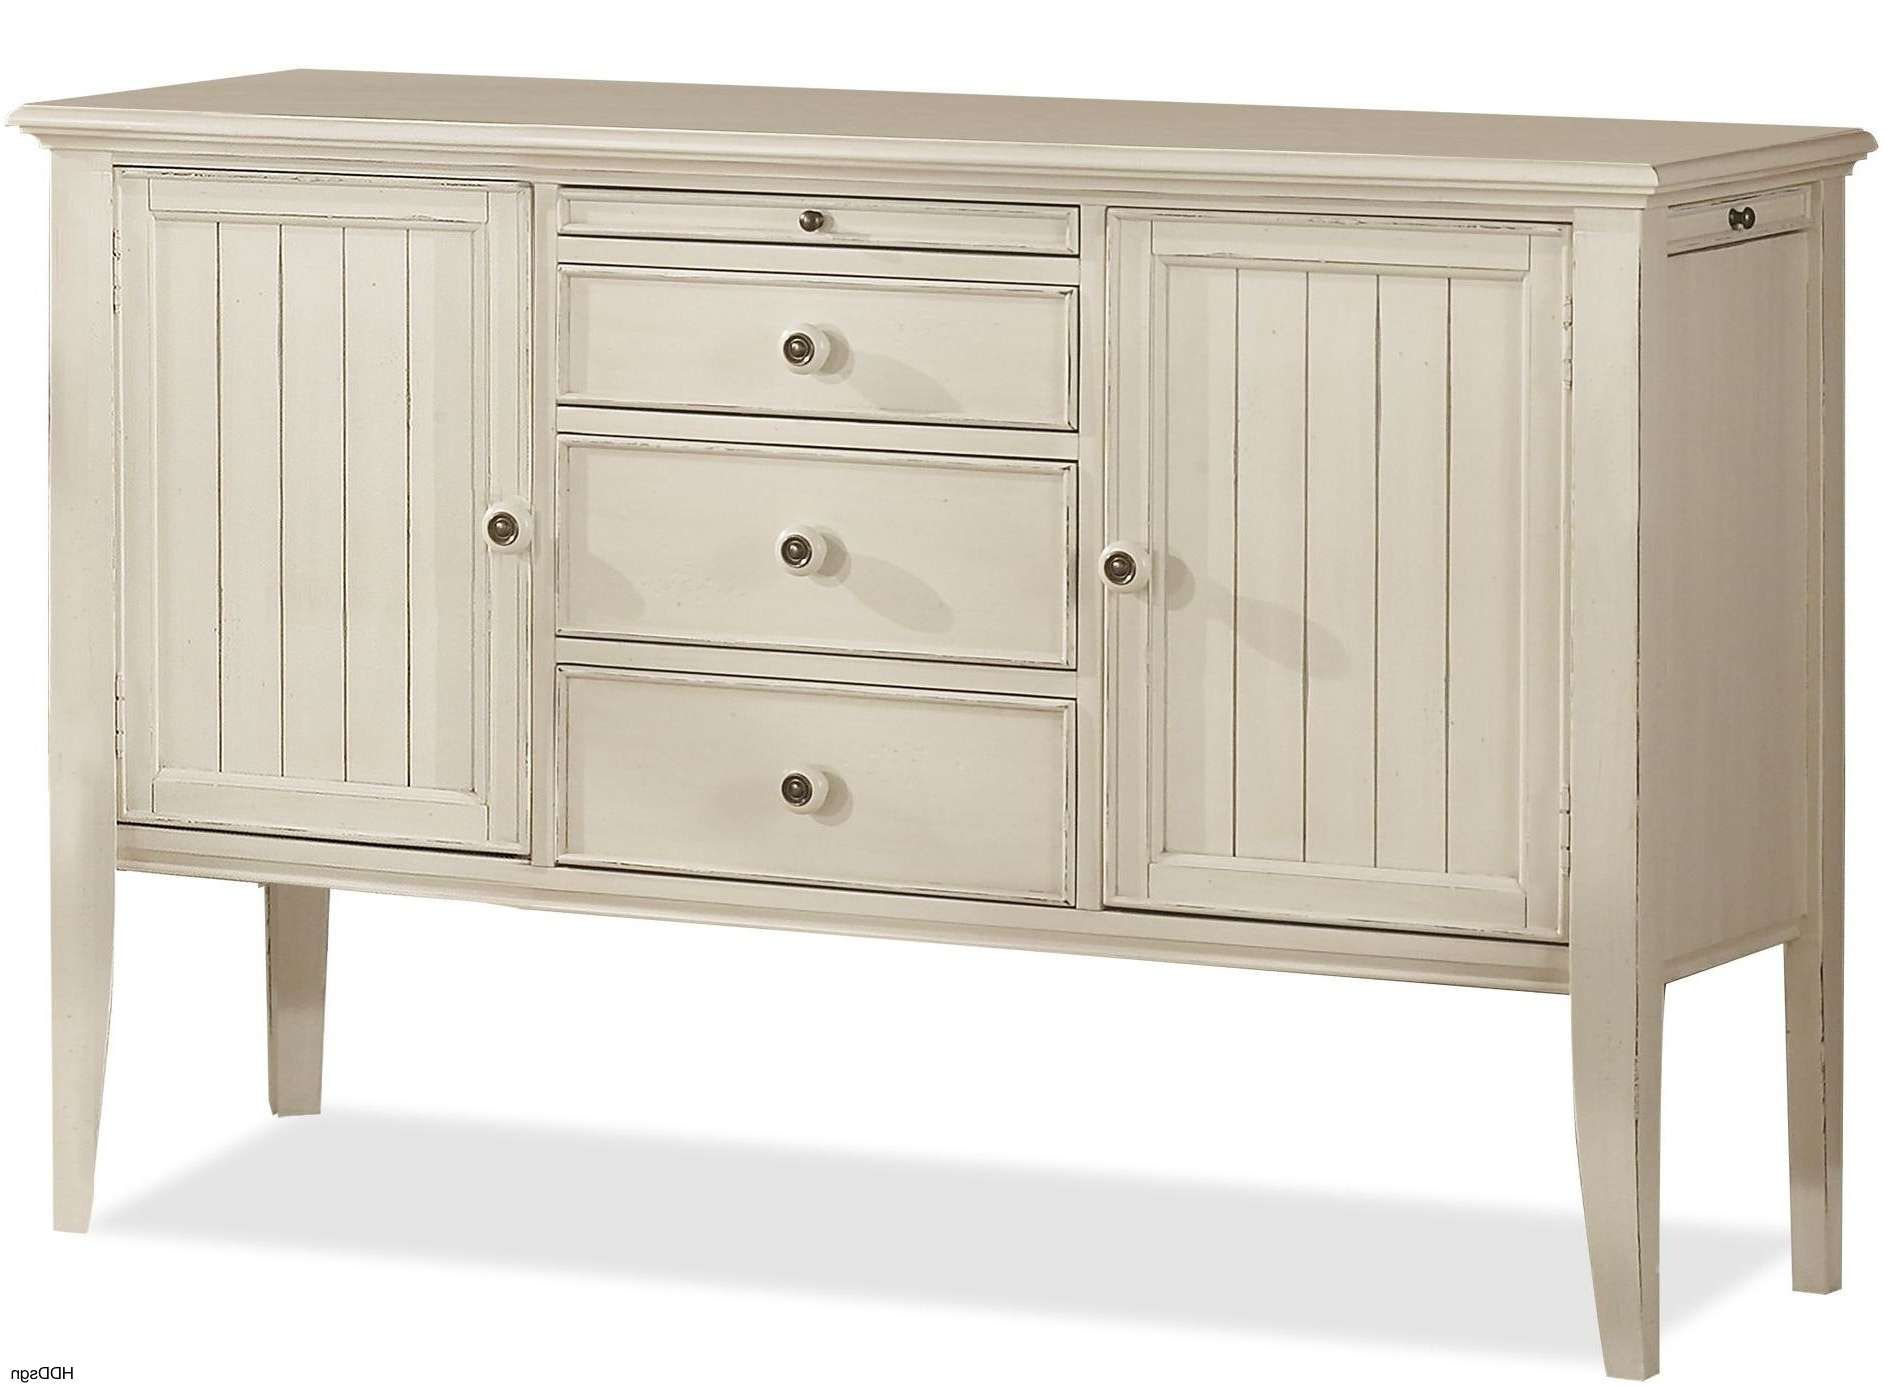 Sideboard Buffet Table Home Design For Sale Outdoor And Tables Intended For Sideboards Buffet Servers (Gallery 20 of 20)